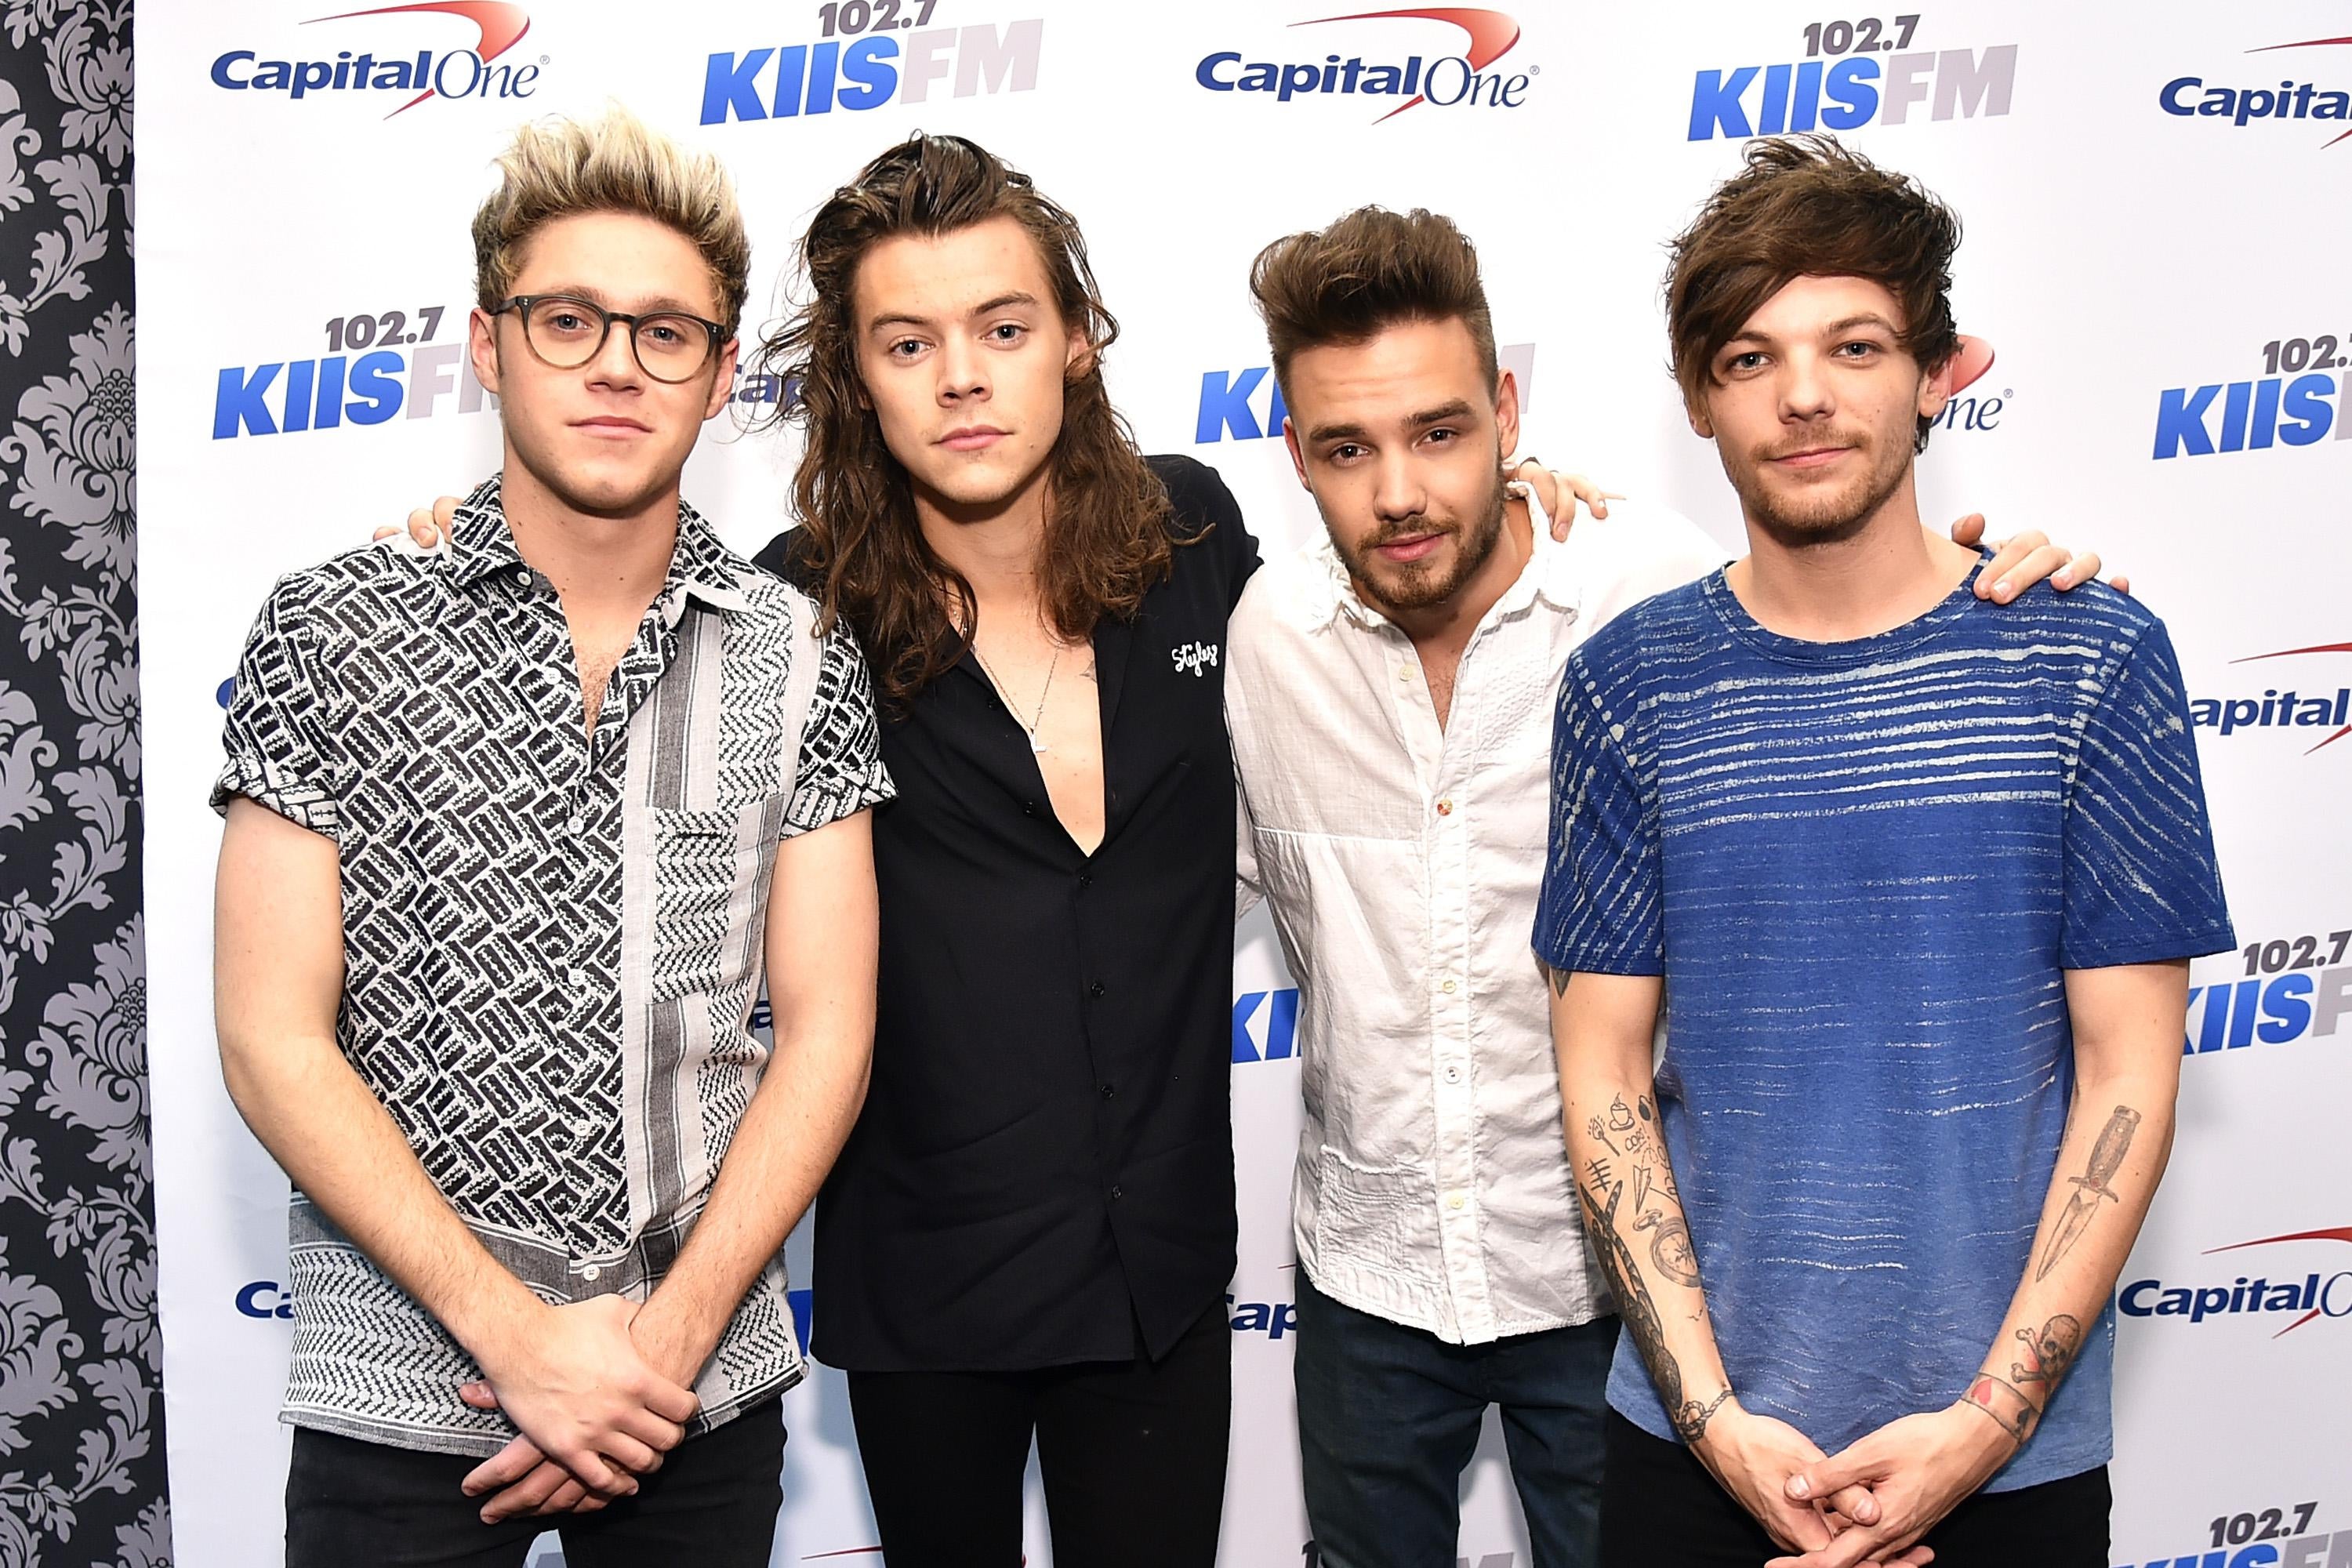 LOS ANGELES, CA - DECEMBER 04:  (L-R) Recording artists Niall Horan, Harry Styles, Liam Payne and Louis Tomlinson of music group One Direction attend 102.7 KIIS FMs Jingle Ball 2015 Presented by Capital One at STAPLES CENTER on December 4, 2015 in Los Angeles, California.  (Photo by Mike Windle/Getty Images for iHeartMedia)